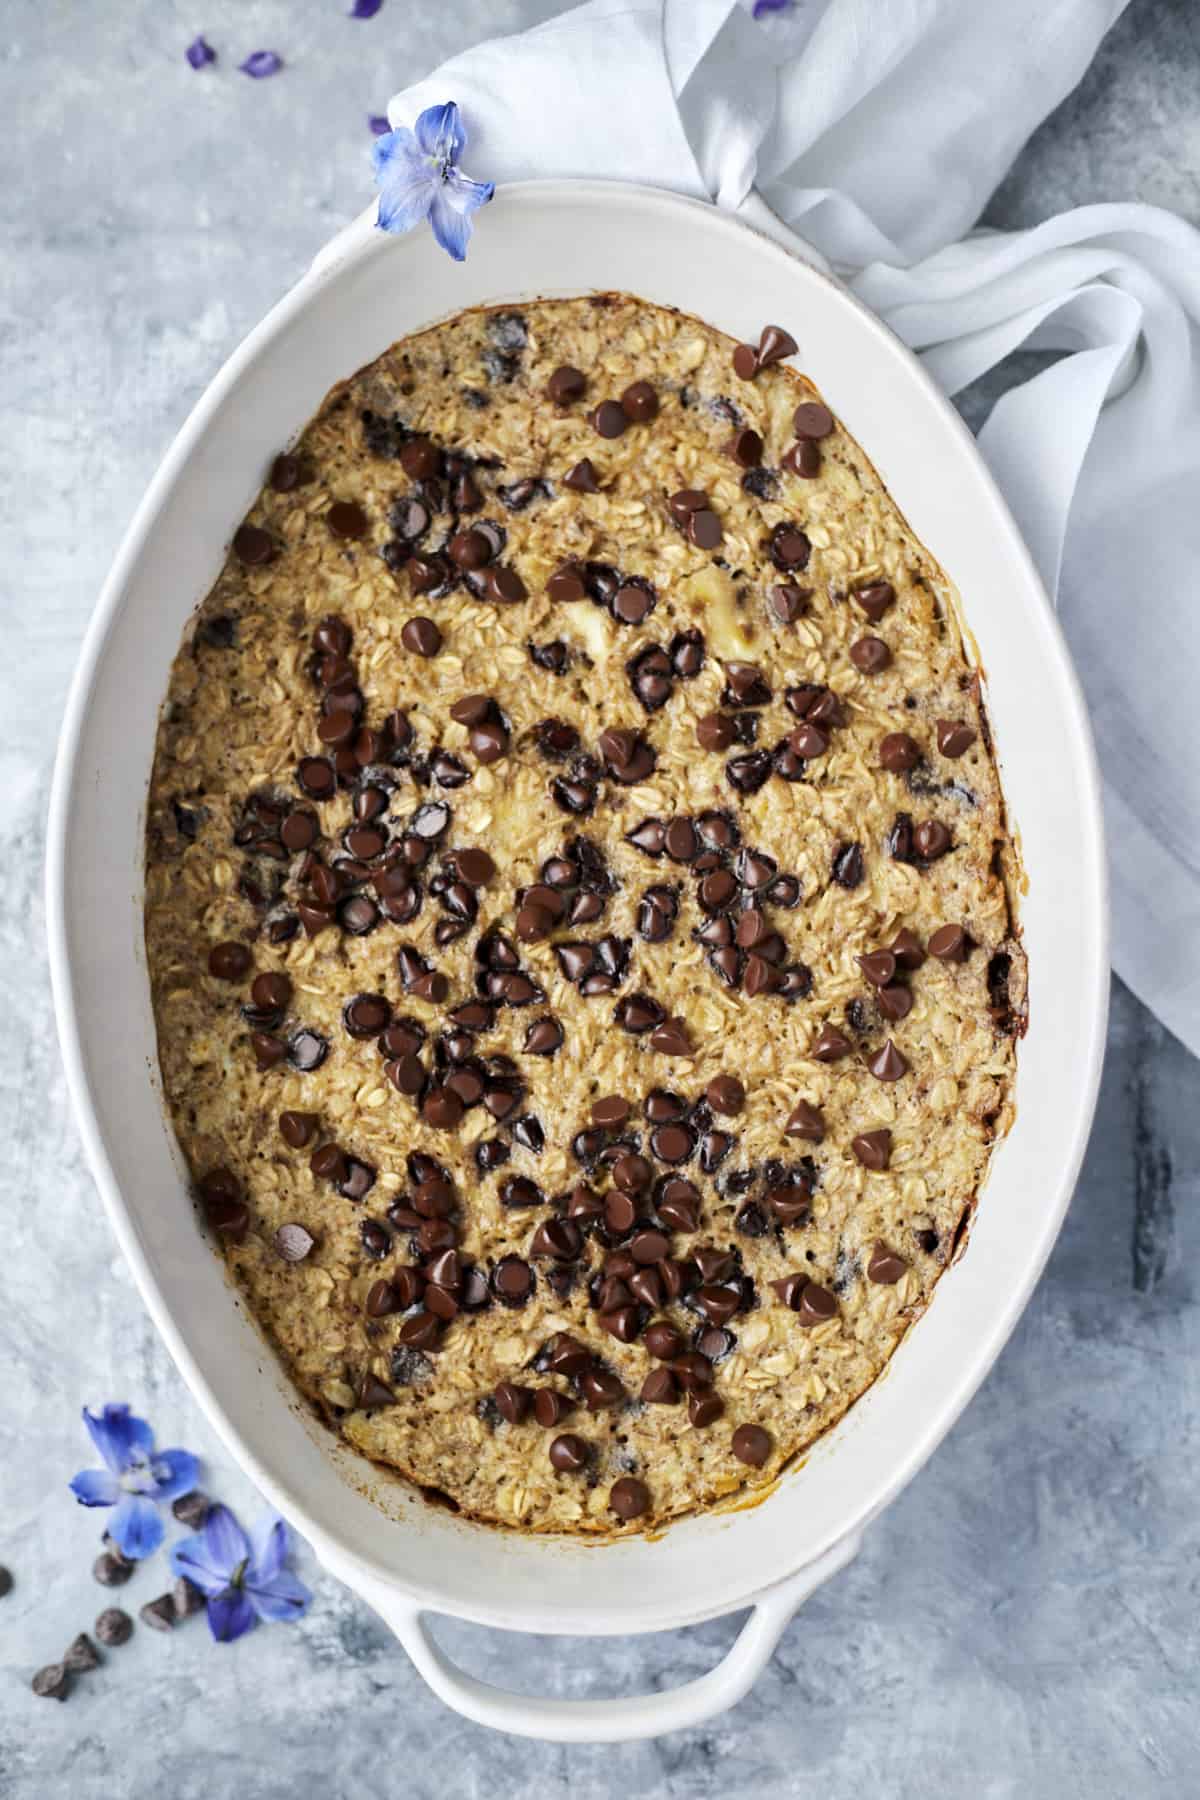 Baked Banana Bread Oatmeal in a baking dish topped with dark chocolate chips